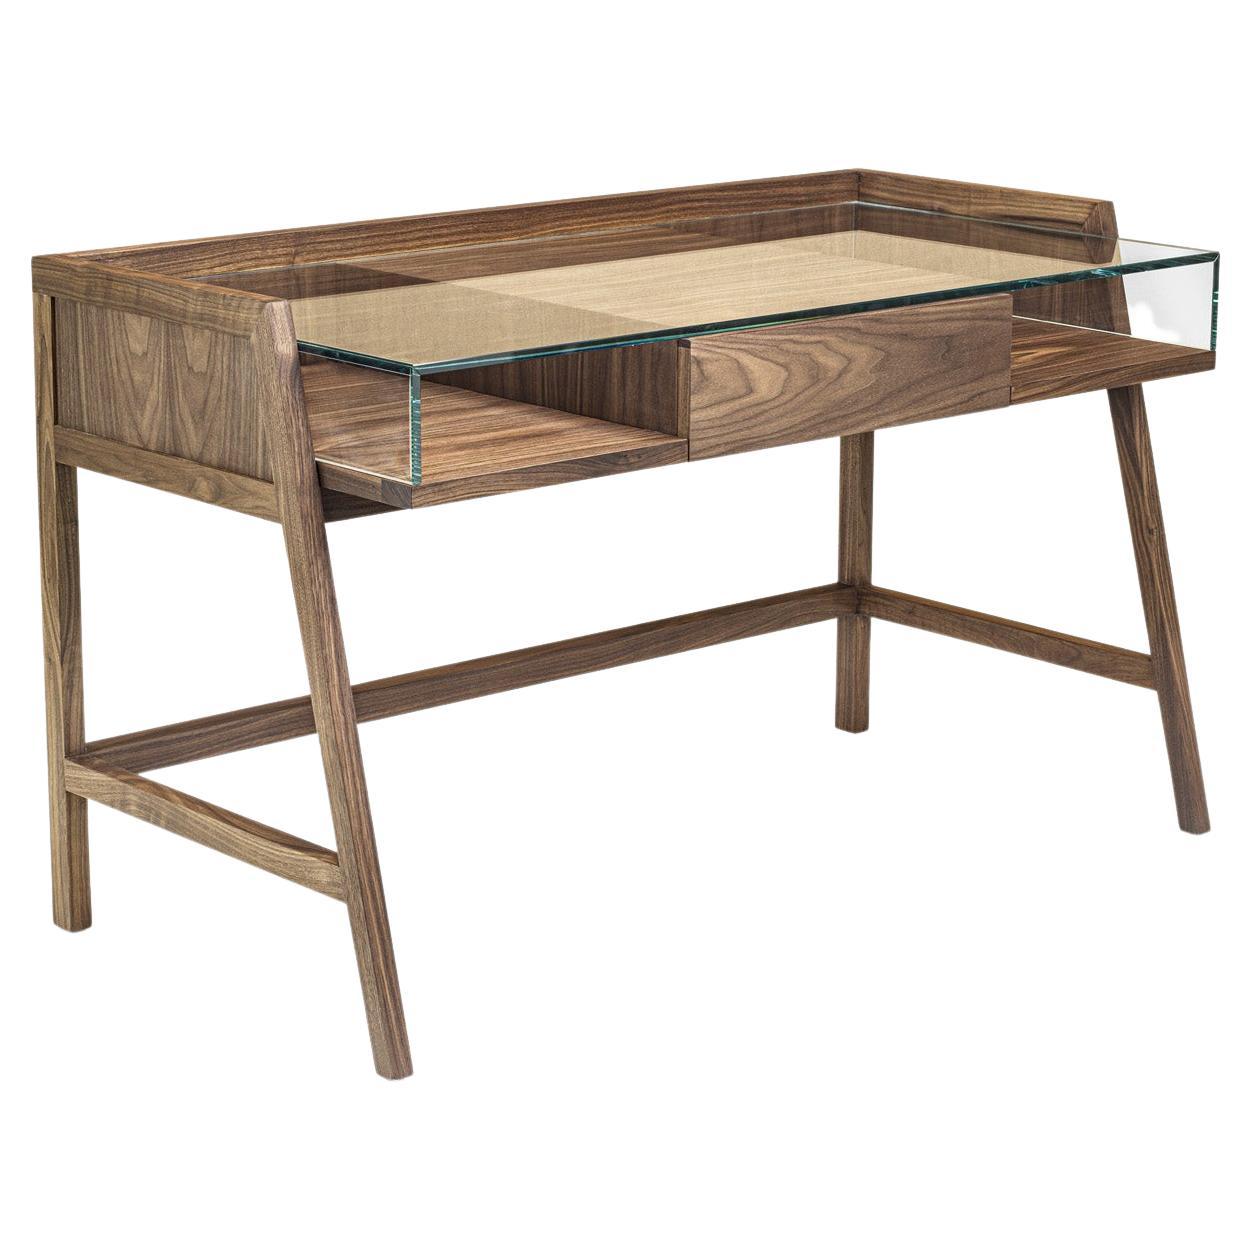 Wood and Glass Writing Desk, Designed by Giovanna Azzarello, Made in Italy